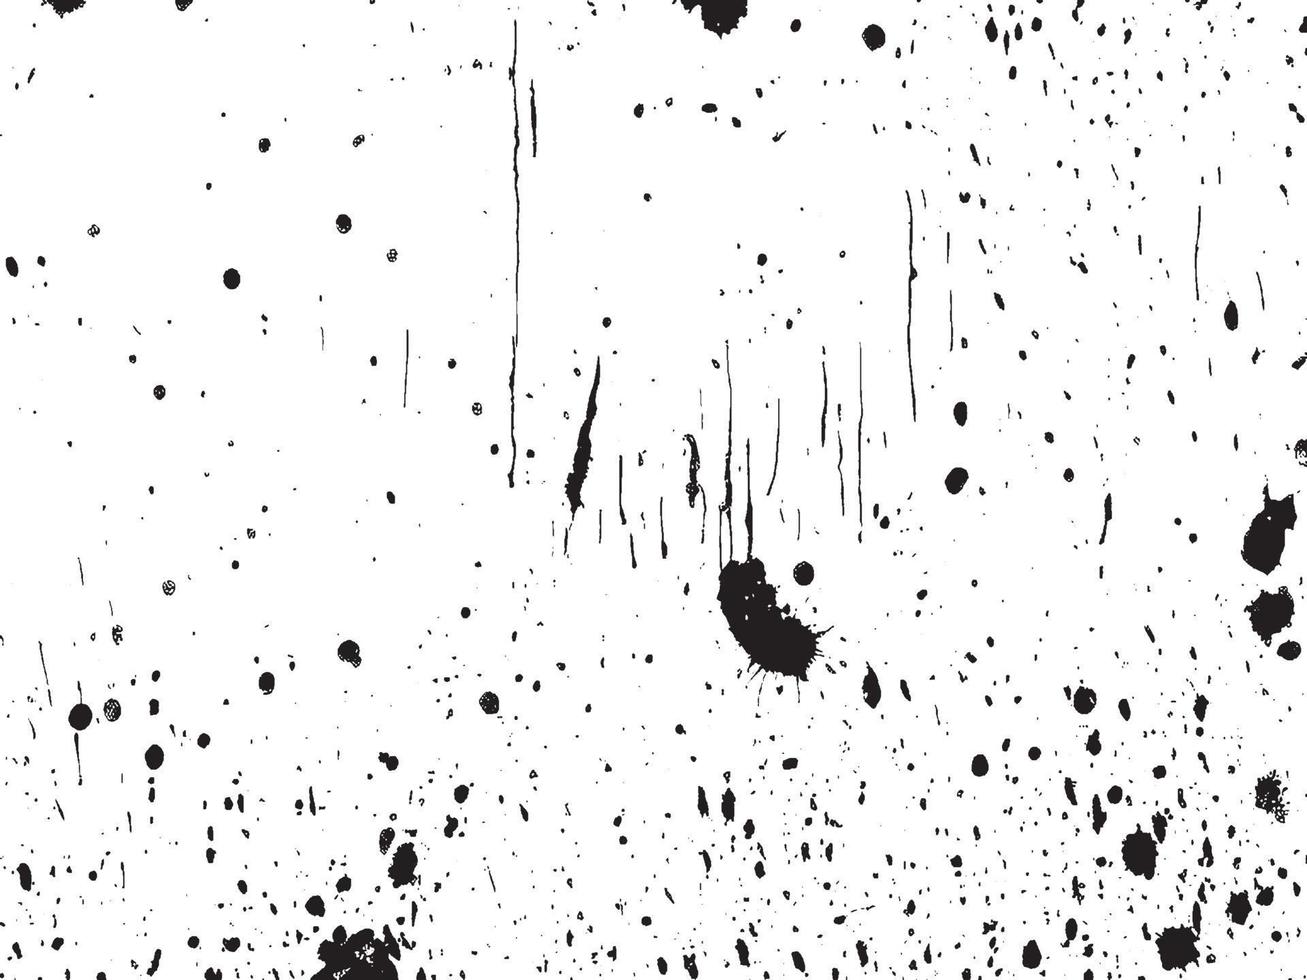 Black and White Grunge Texture Vector Background with Splatter and Scratch Effects. EPS 10.